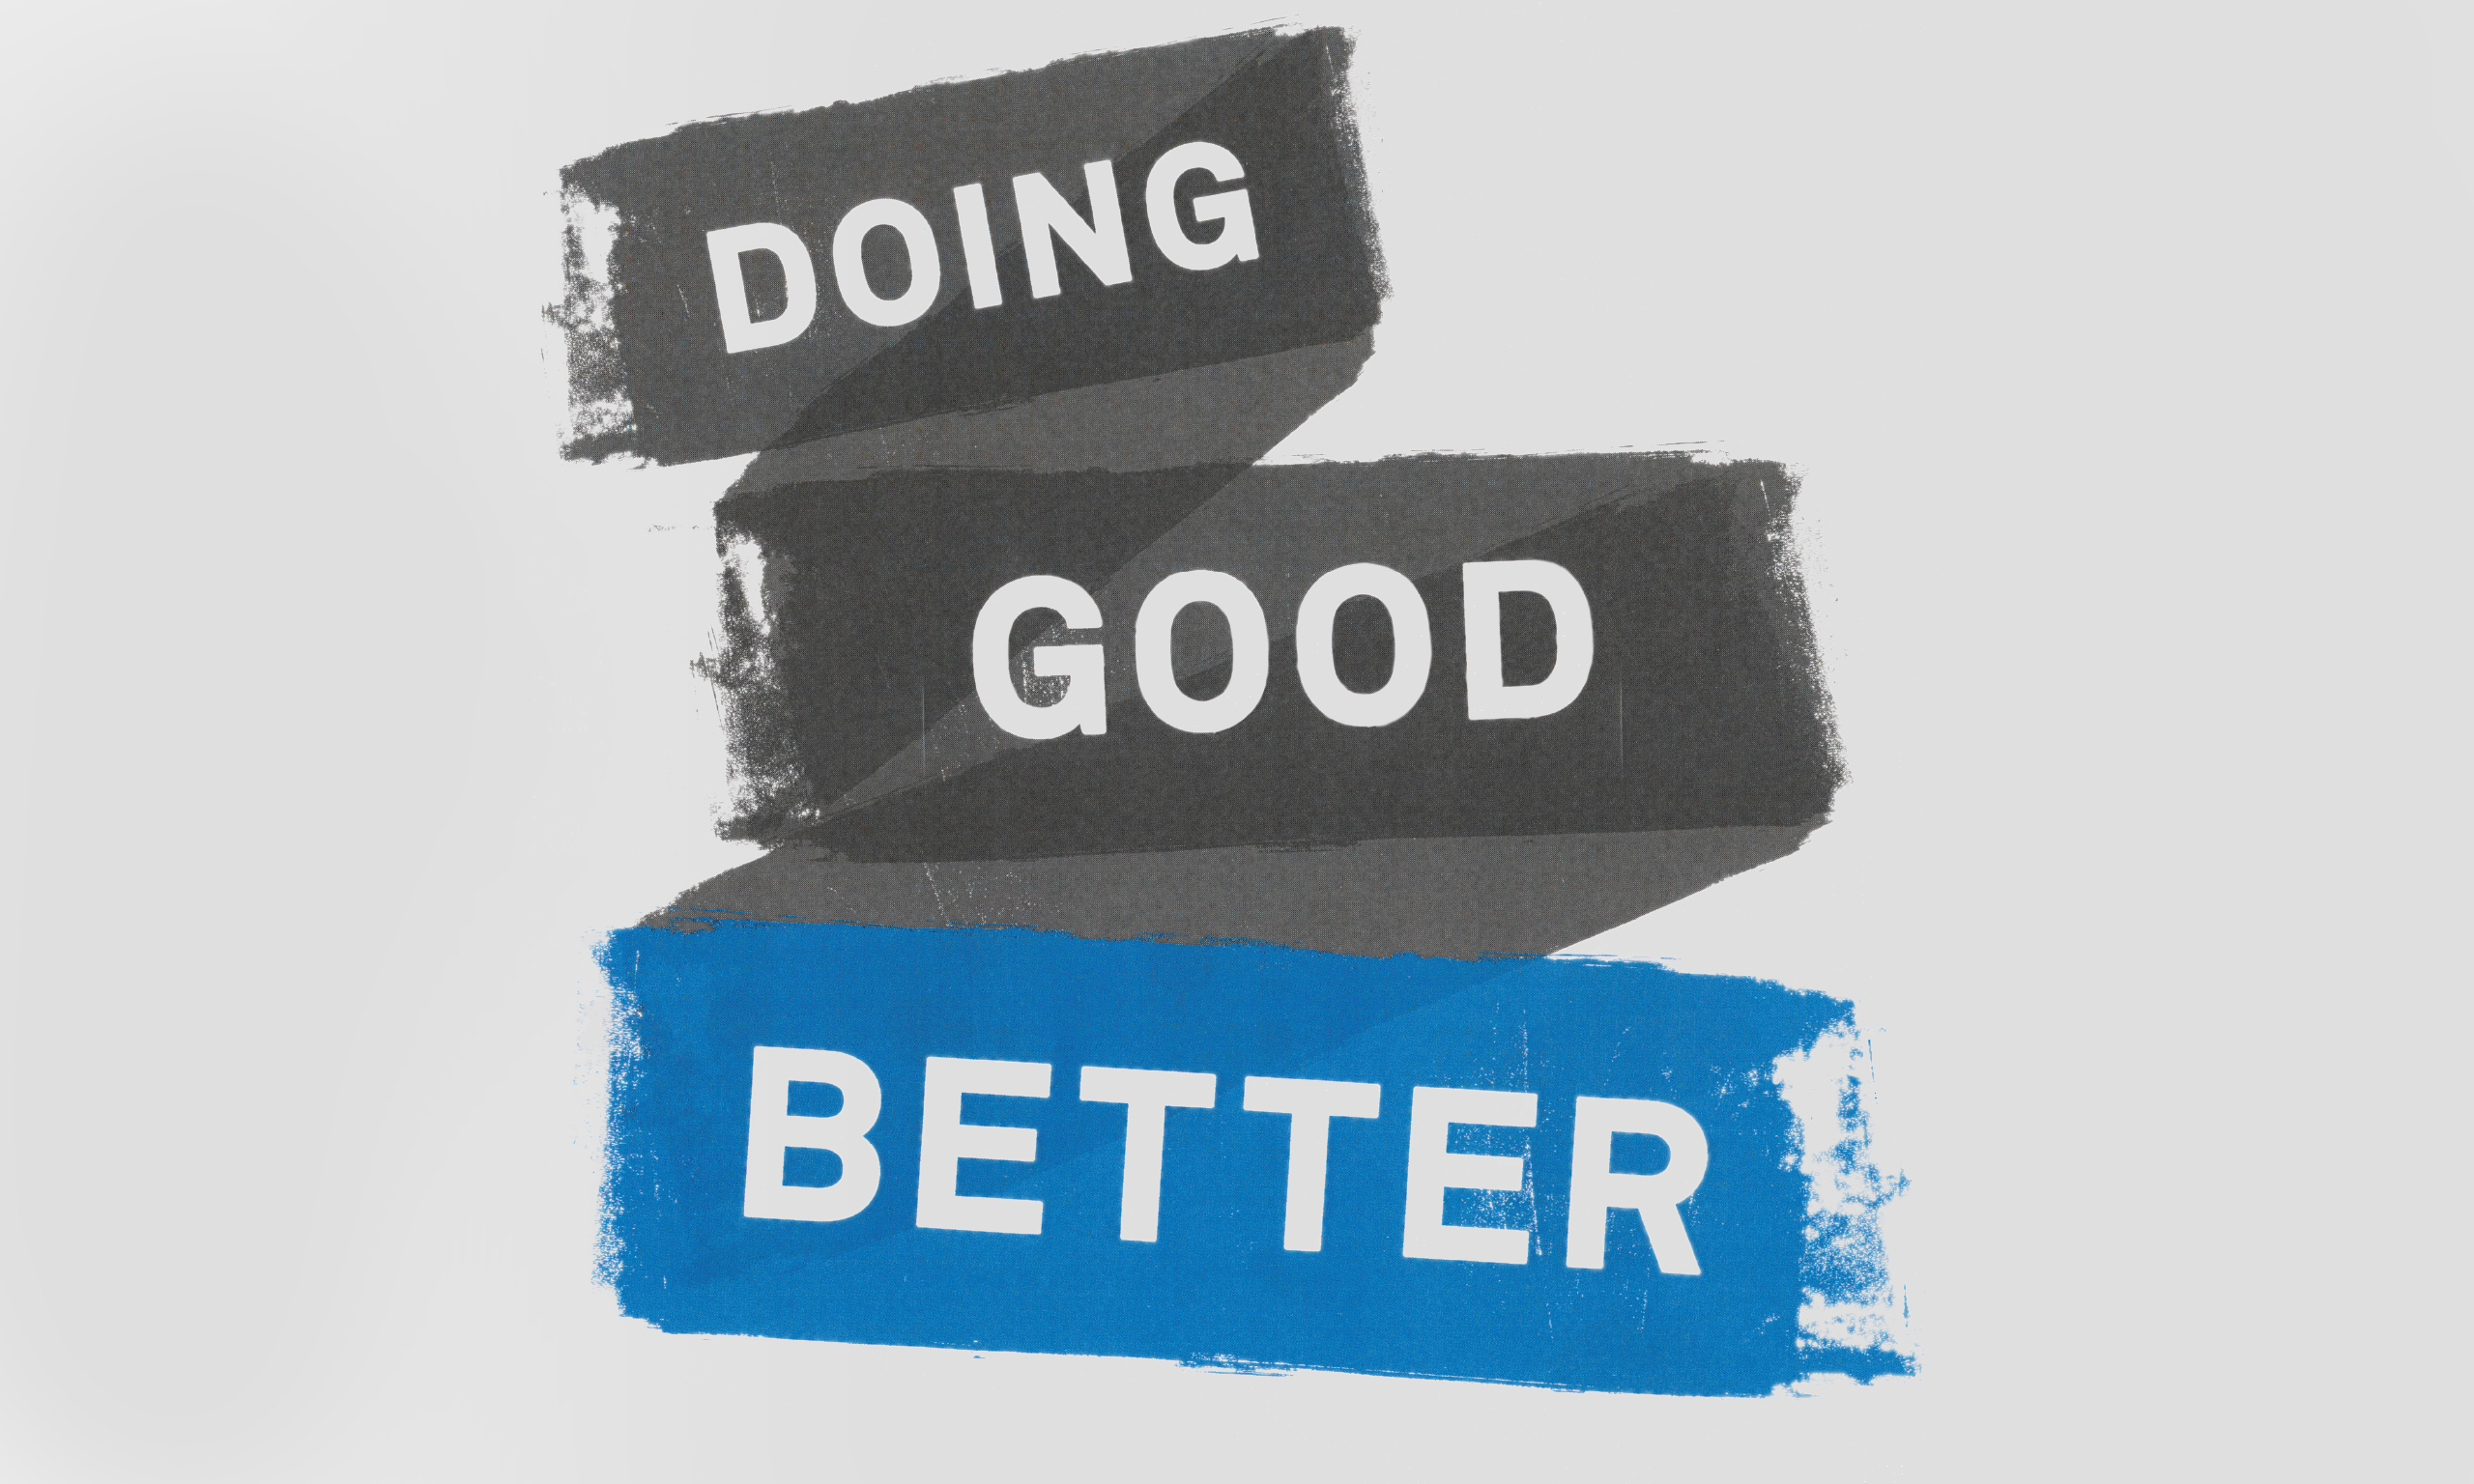 Titling for magazine article "Doing Good Better."